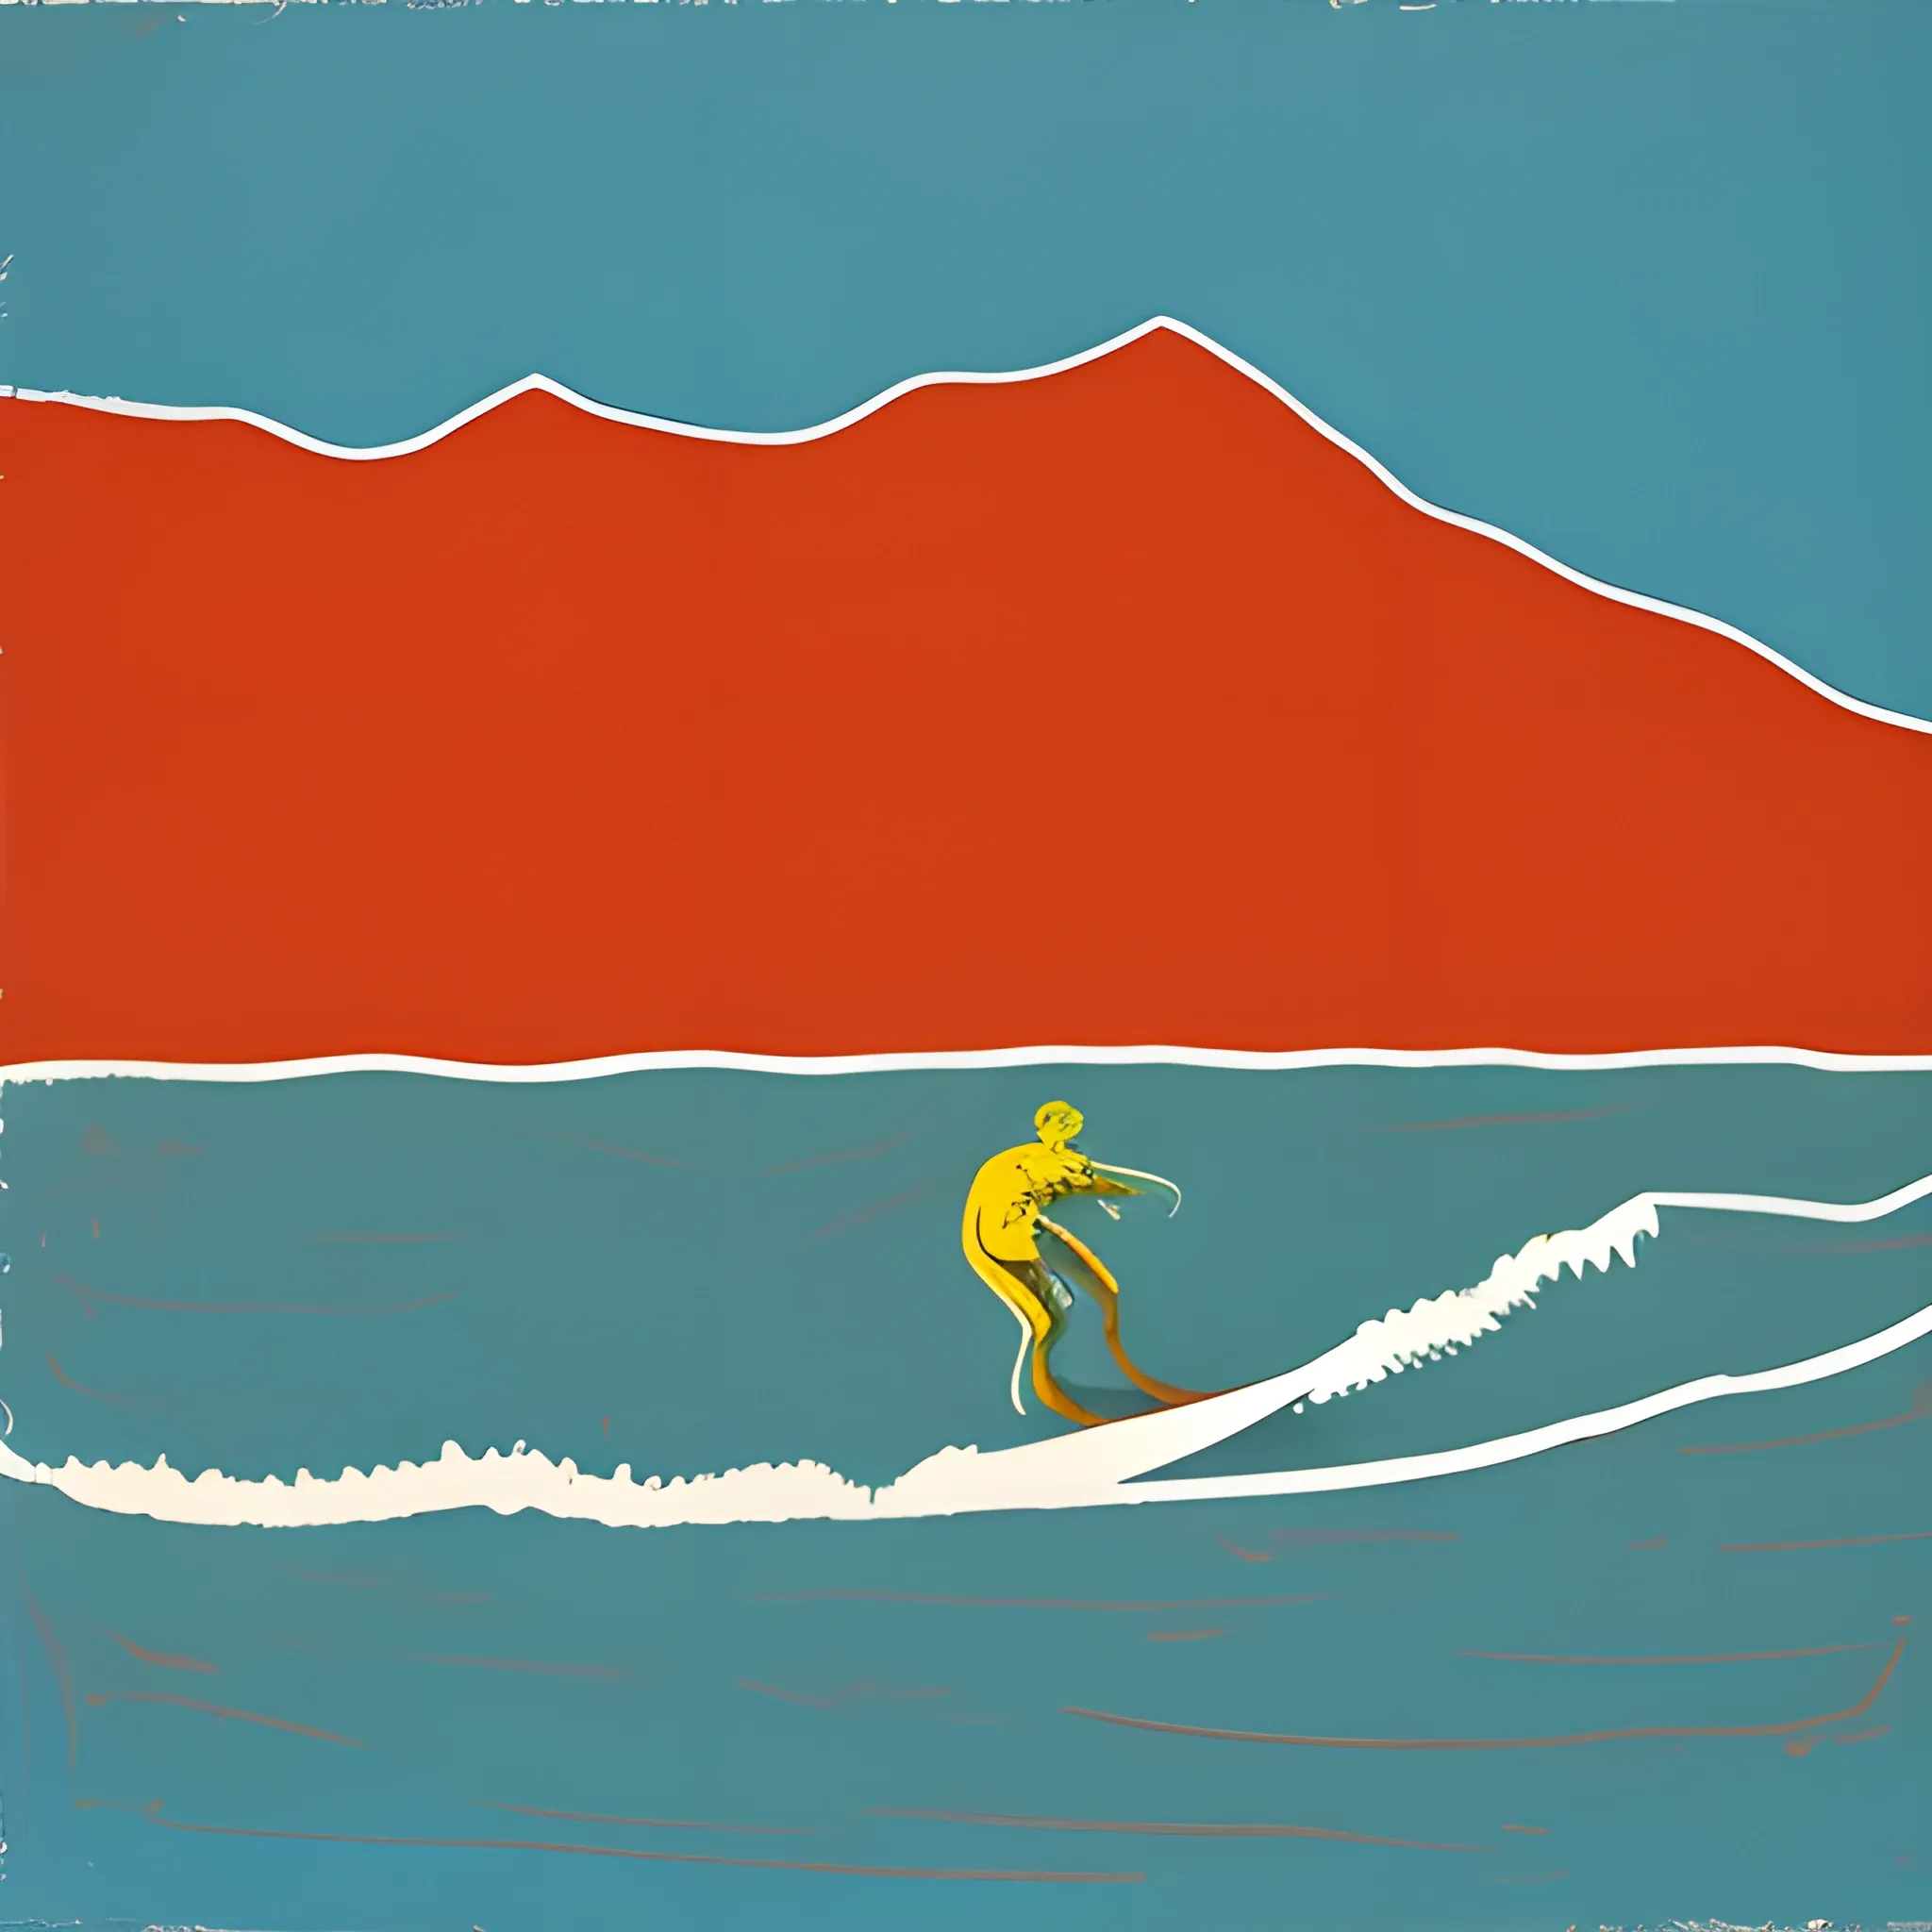 andy warhol painting that capture the essence of surfing, nature, the ocean, camping, rock climbing, travel